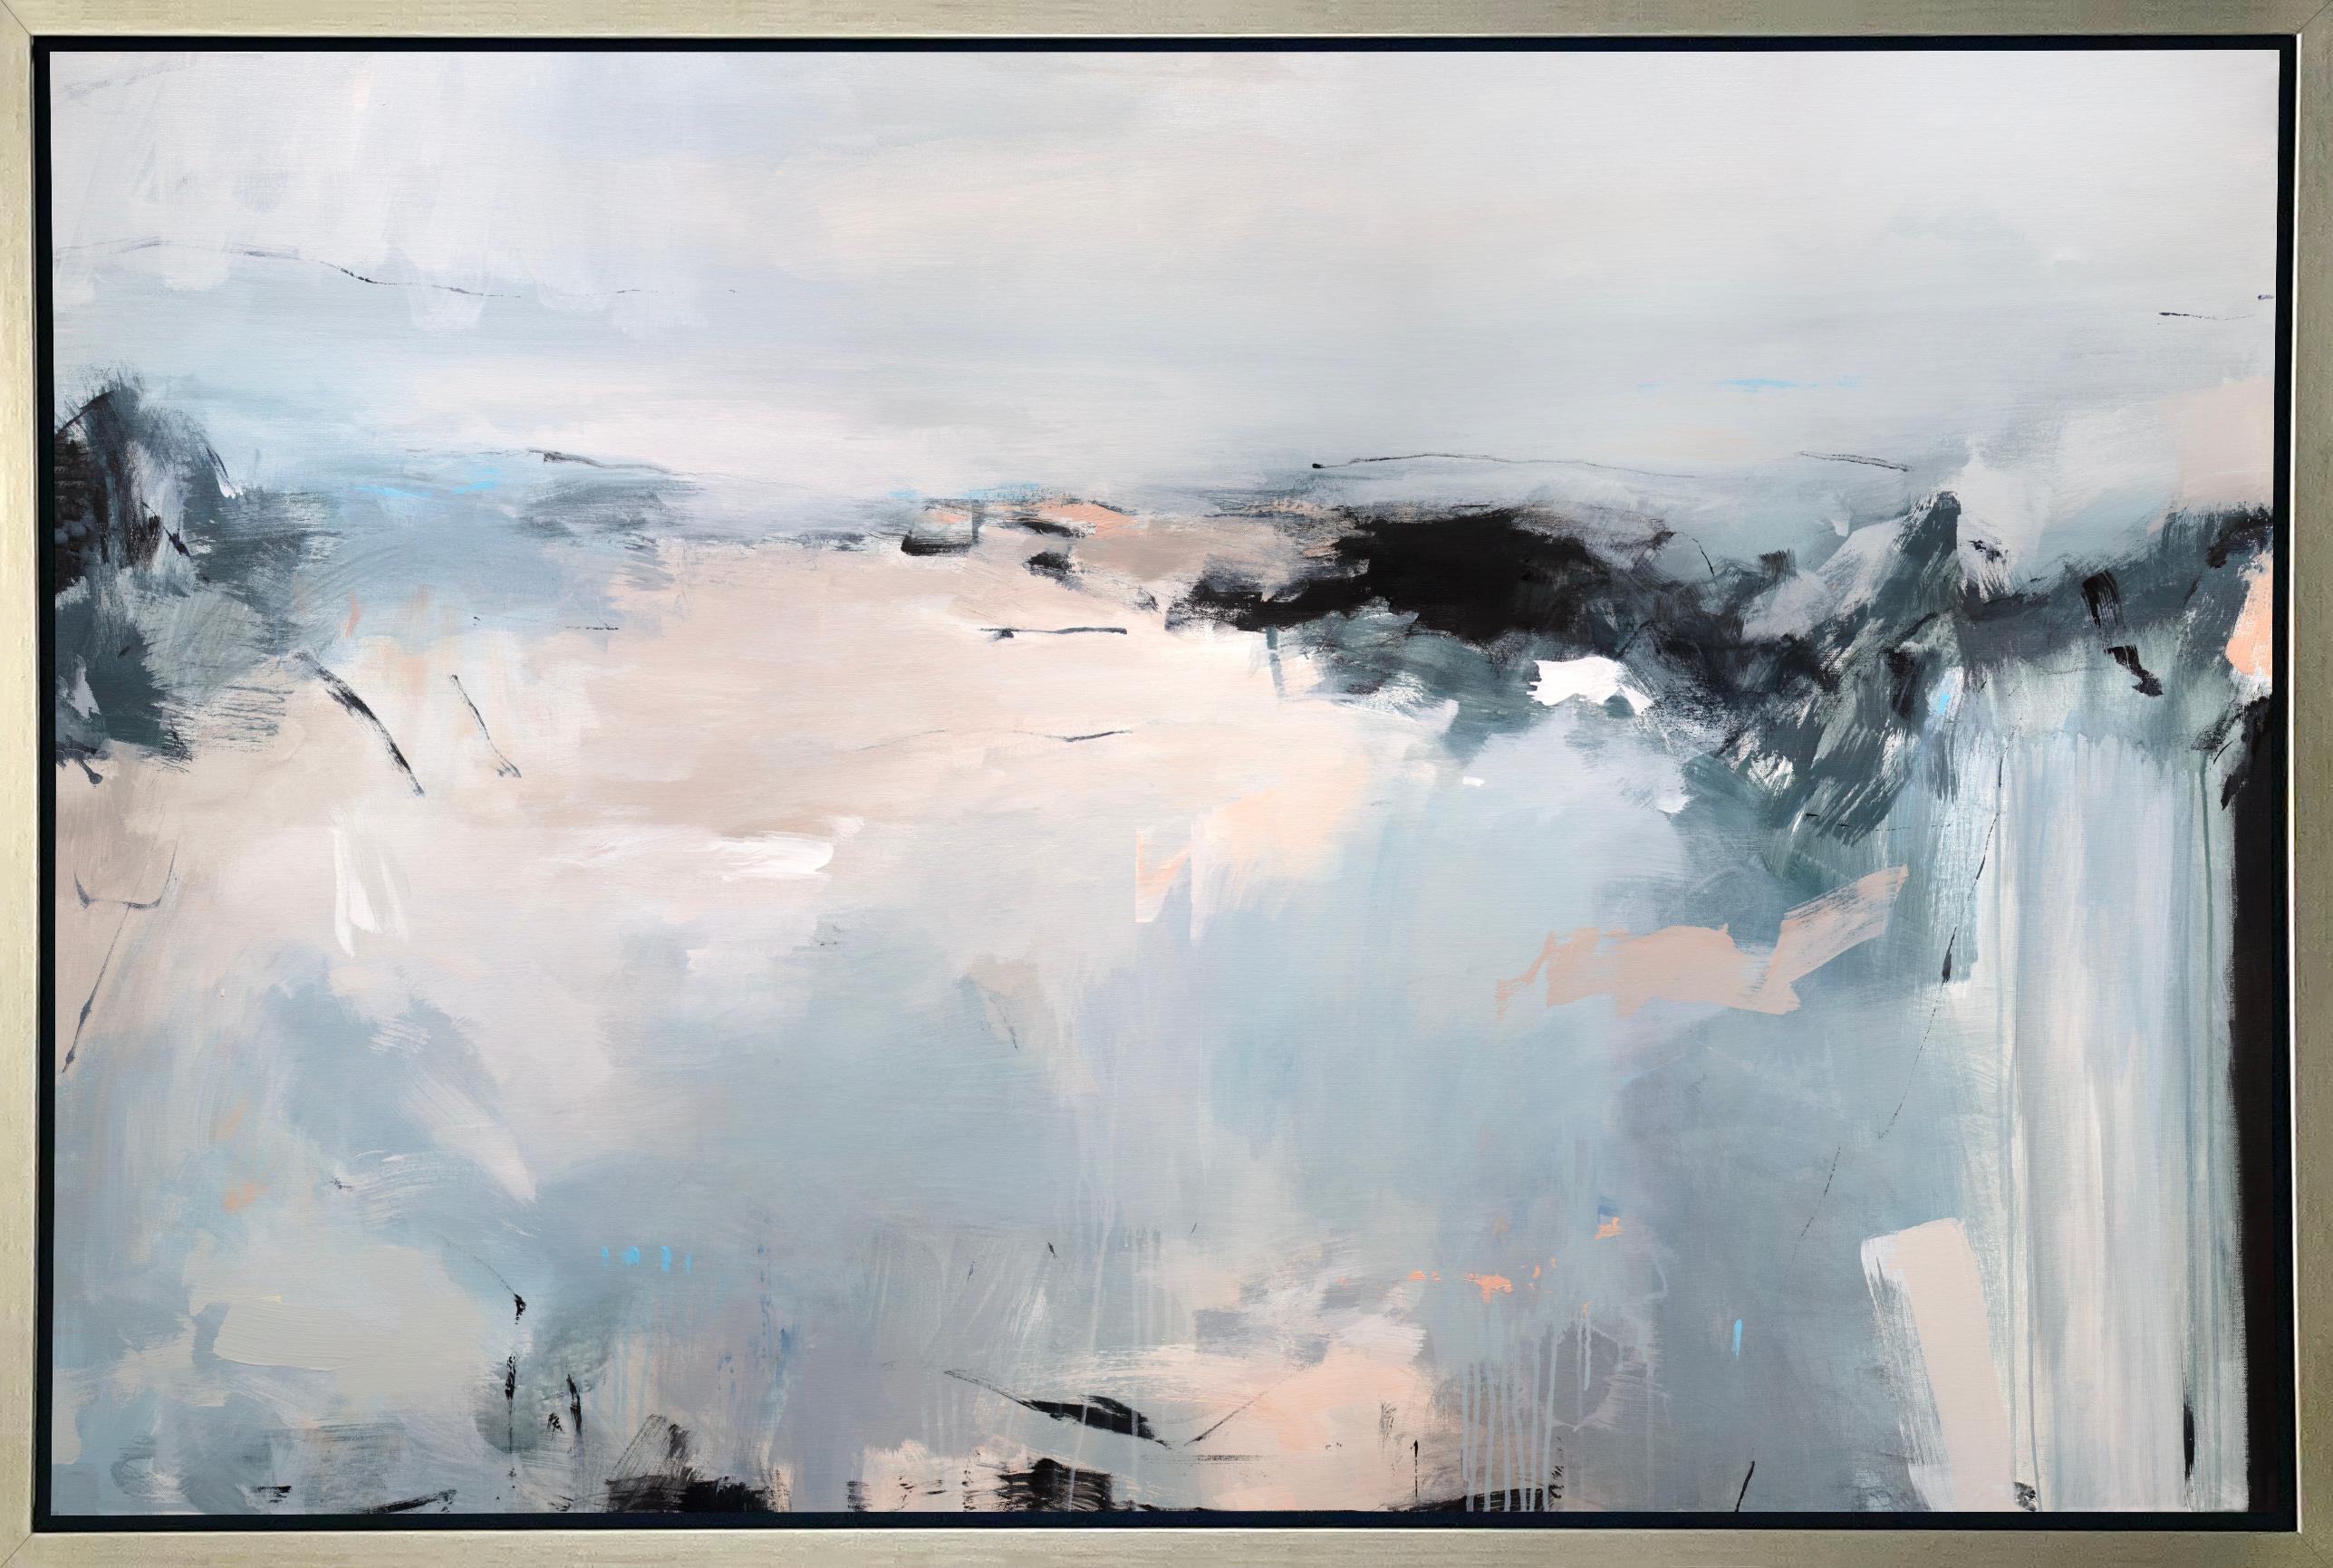 Kelly Rossetti Abstract Print - "Take the Journey, " Framed Limited Edition Giclee Print, 48" x 72"